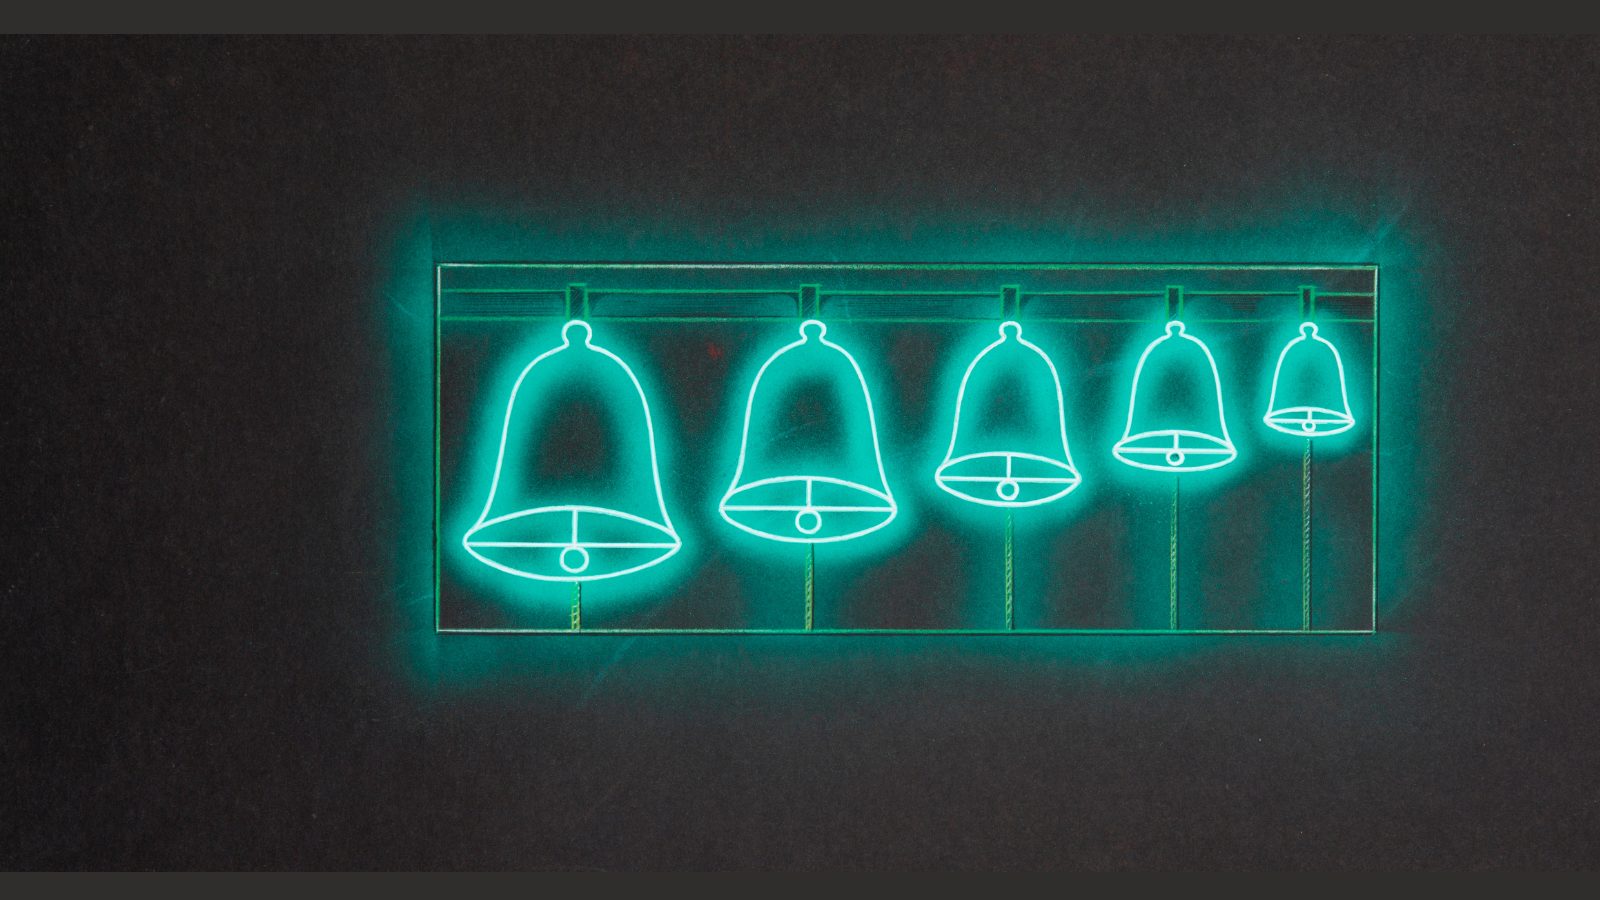 Concept design on black paper for a neon installations for town hall of 5 bells in turquoise